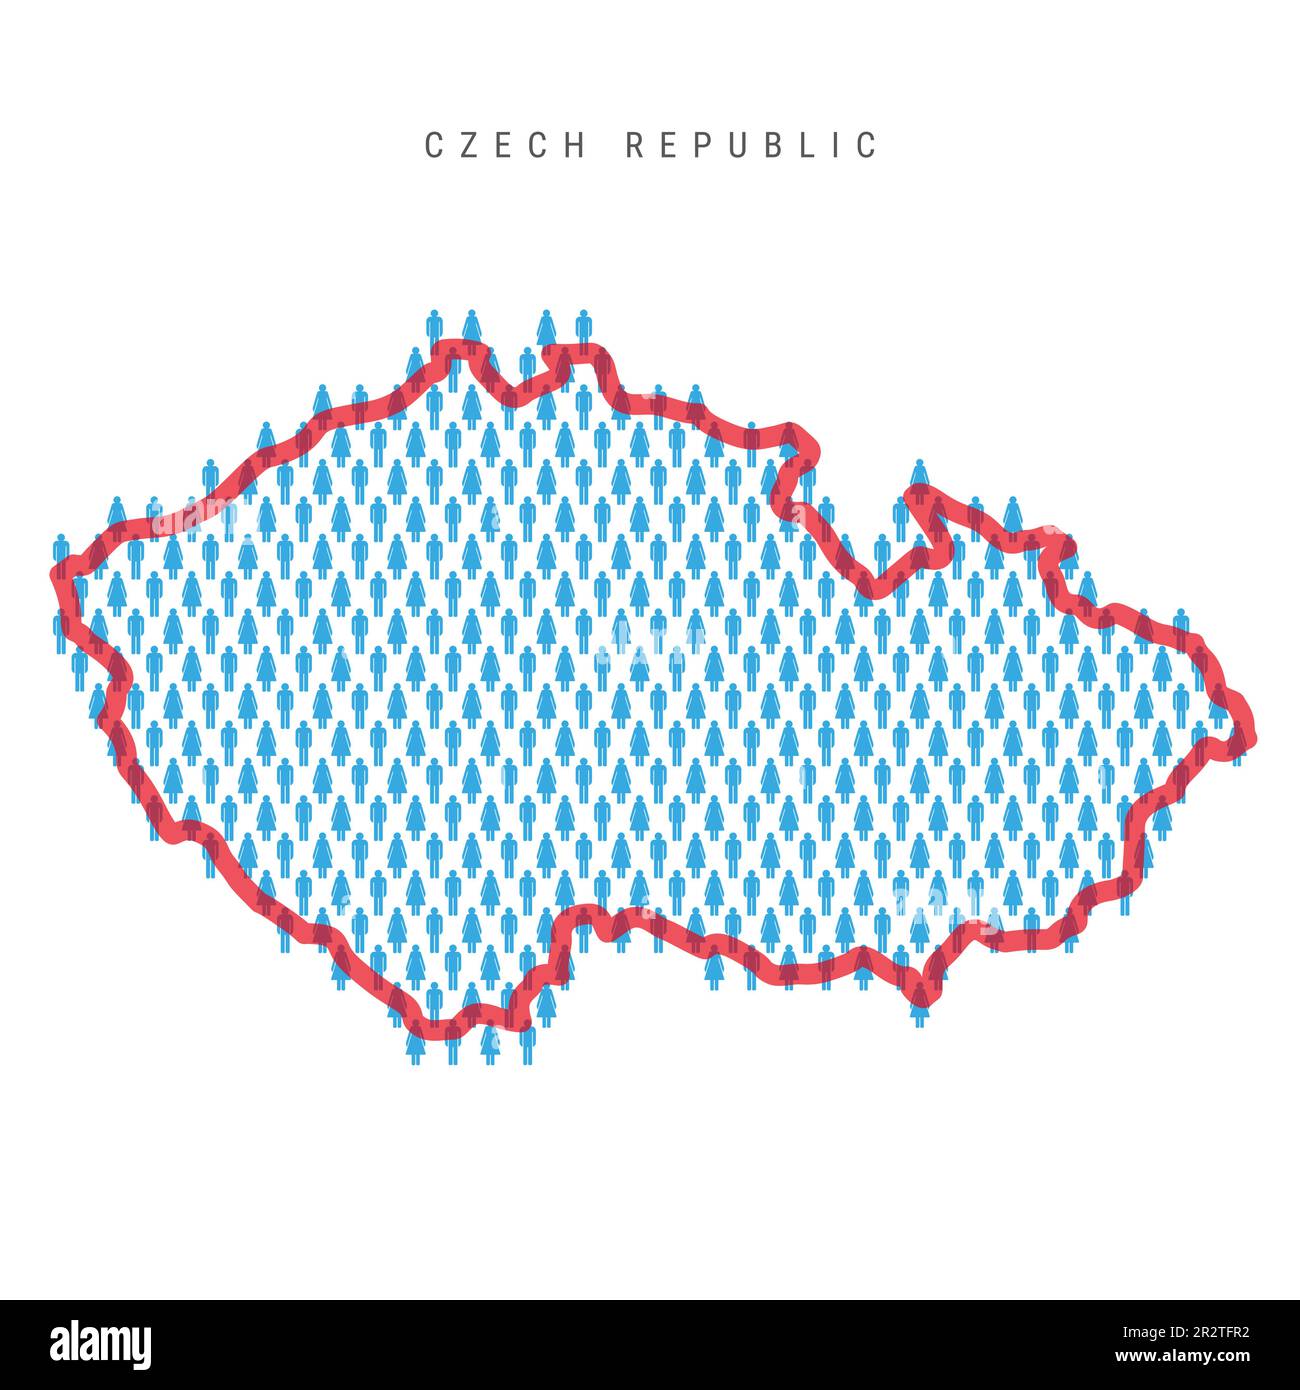 Czech Republic population map. Stick figures Czechia people map with bold red translucent country border. Pattern of men and women icons. Isolated vec Stock Vector